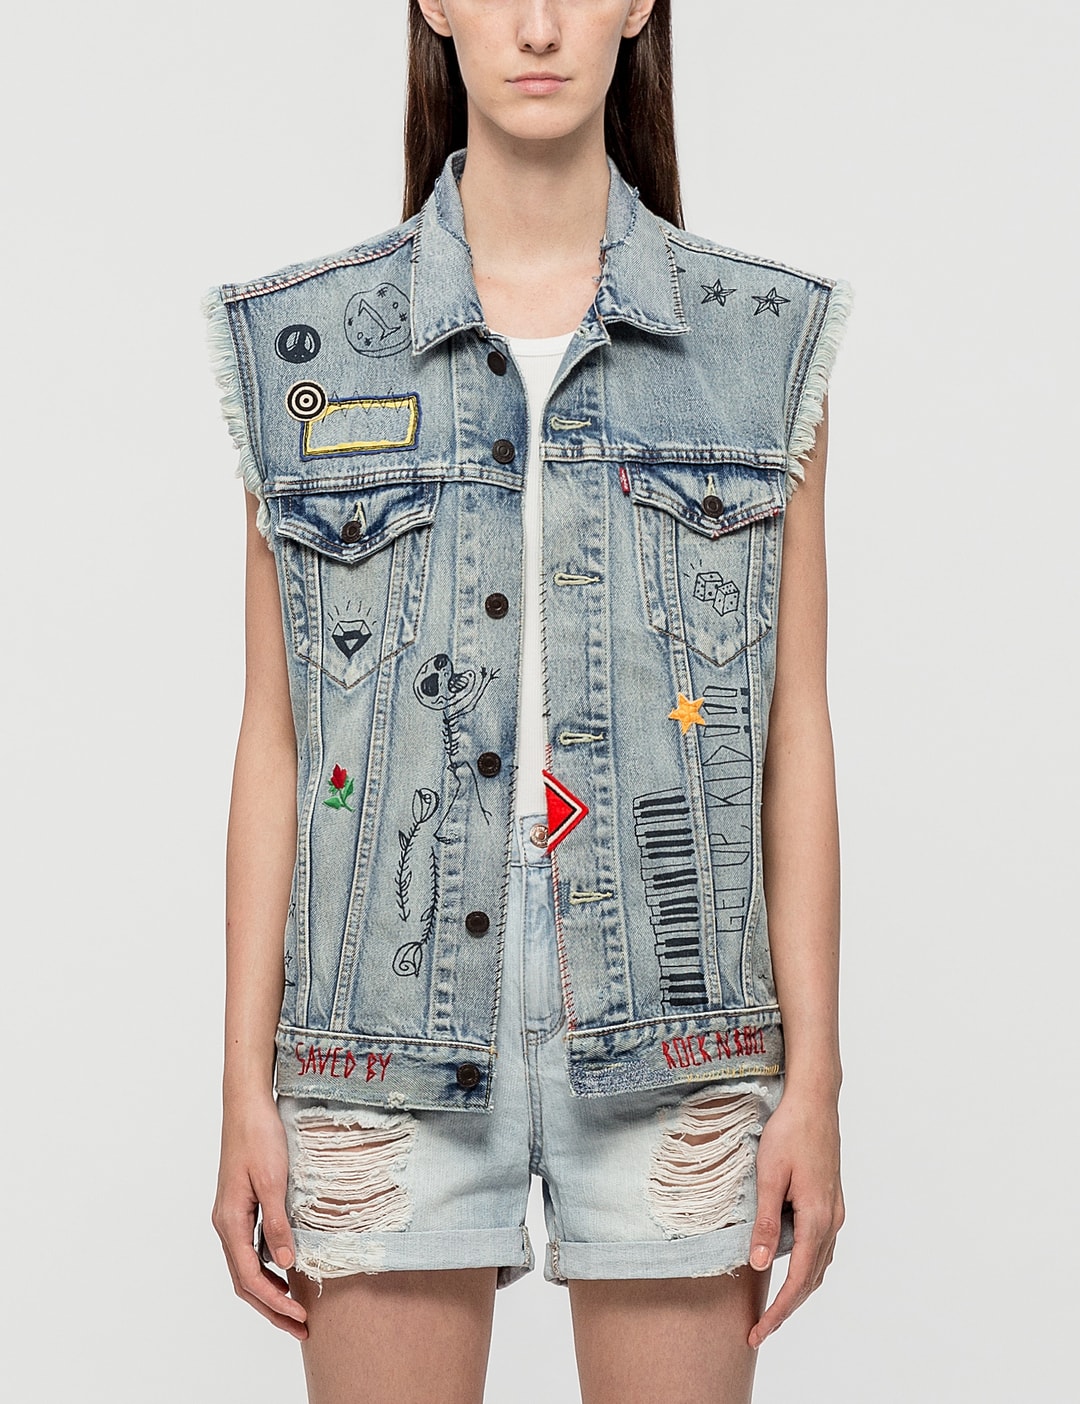 Levi's - Unisex May Celebration Trucker Vest | HBX - Globally Curated  Fashion and Lifestyle by Hypebeast